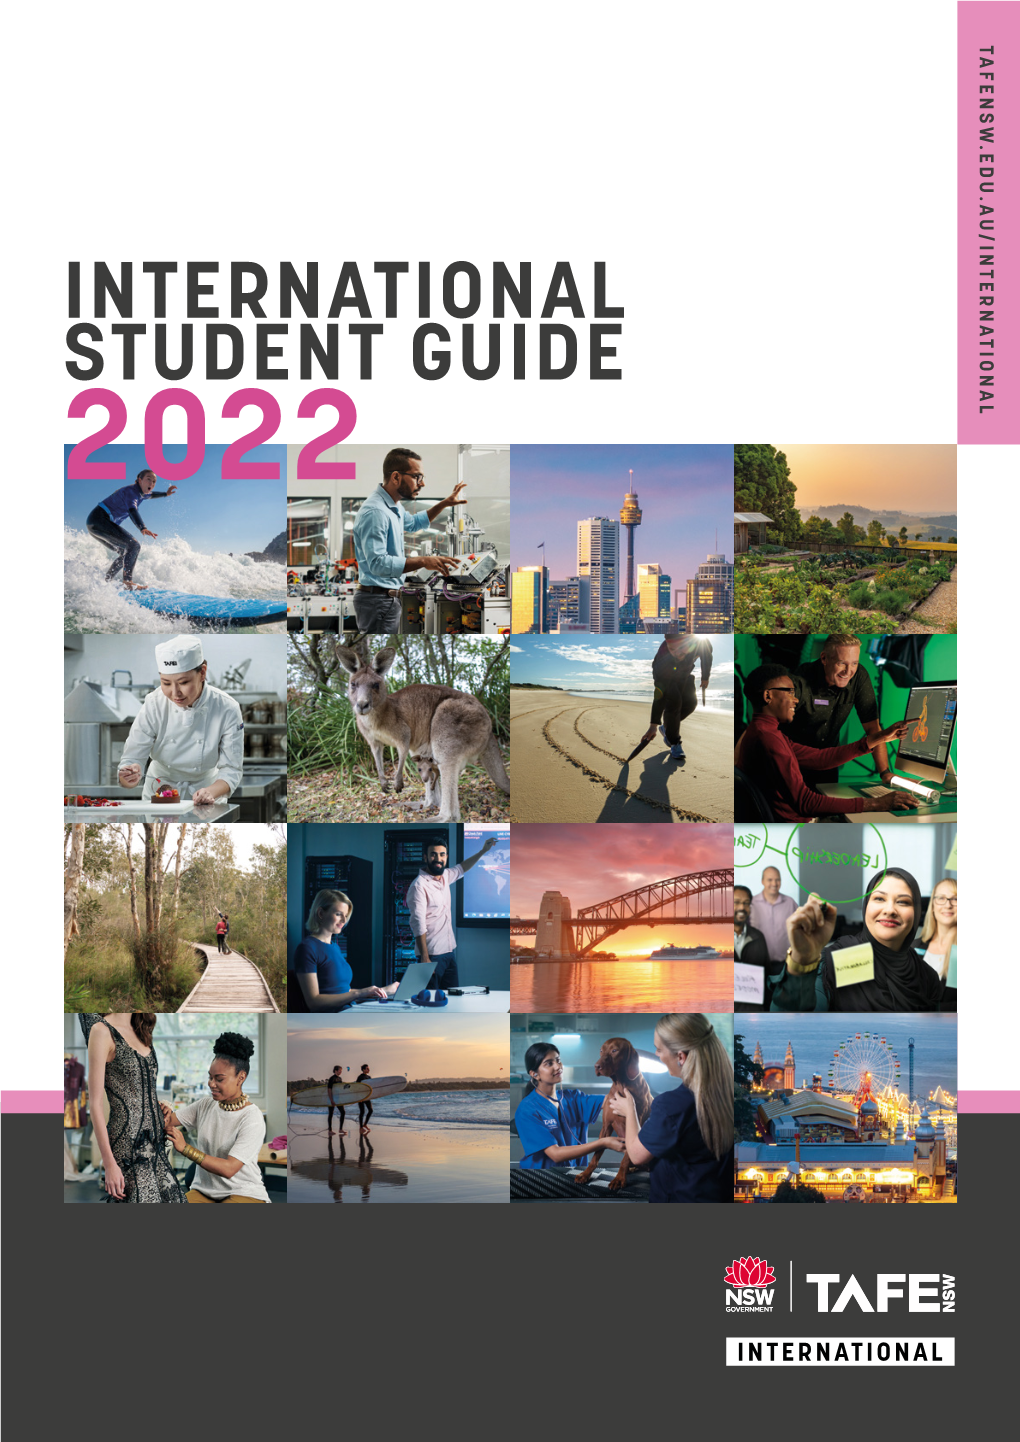 TAFE NSW INTERNATIONAL STUDENT GUIDE 2022 | Correct at Time of Printing (August 2021)